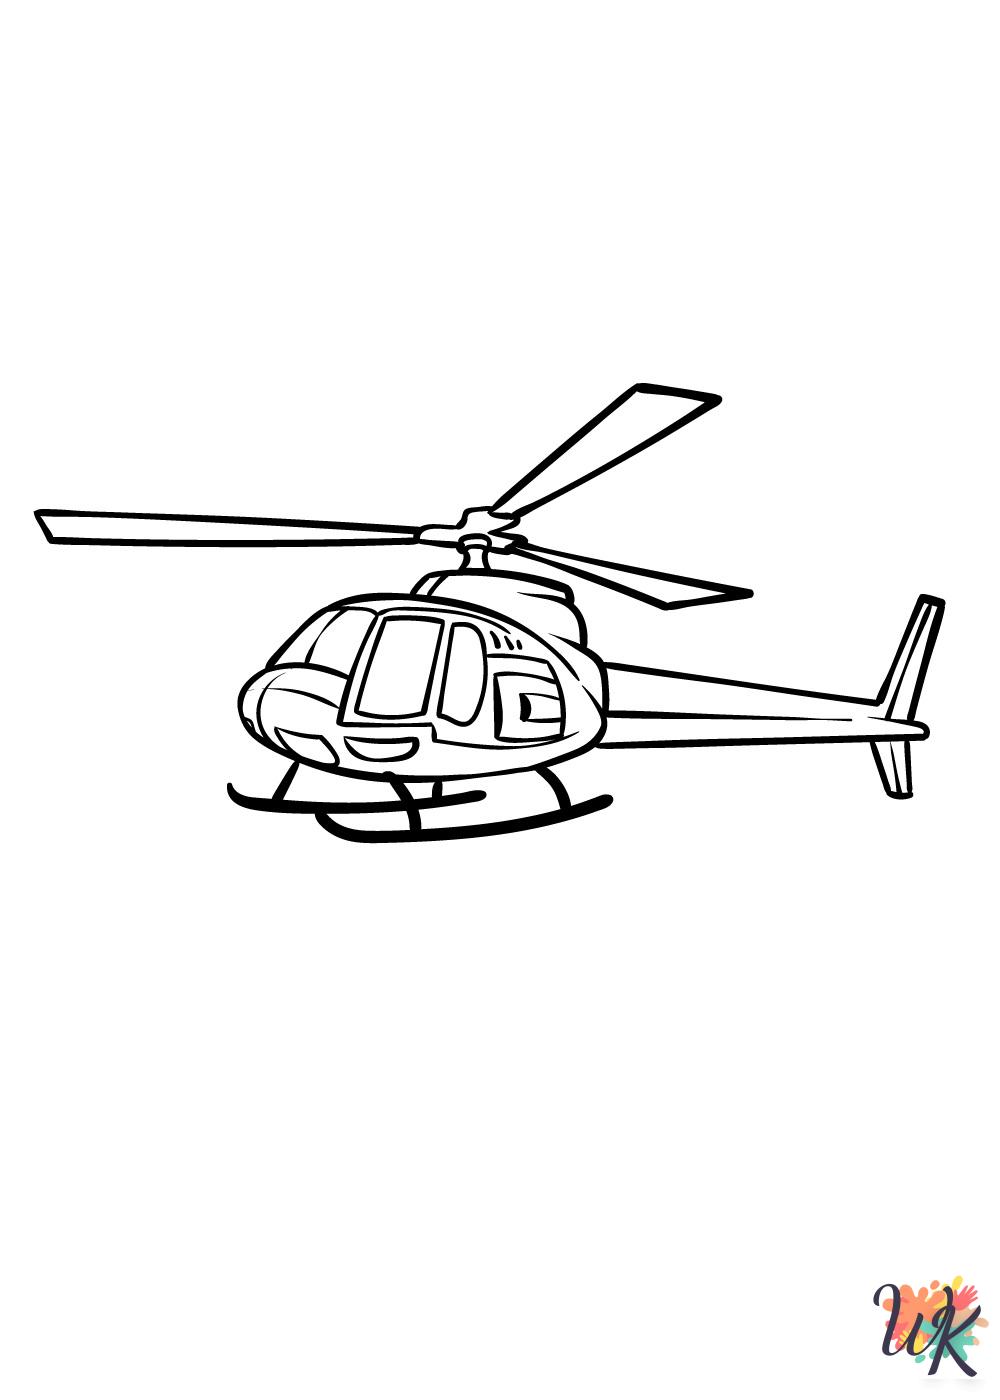 detailed Helicopter coloring pages for adults